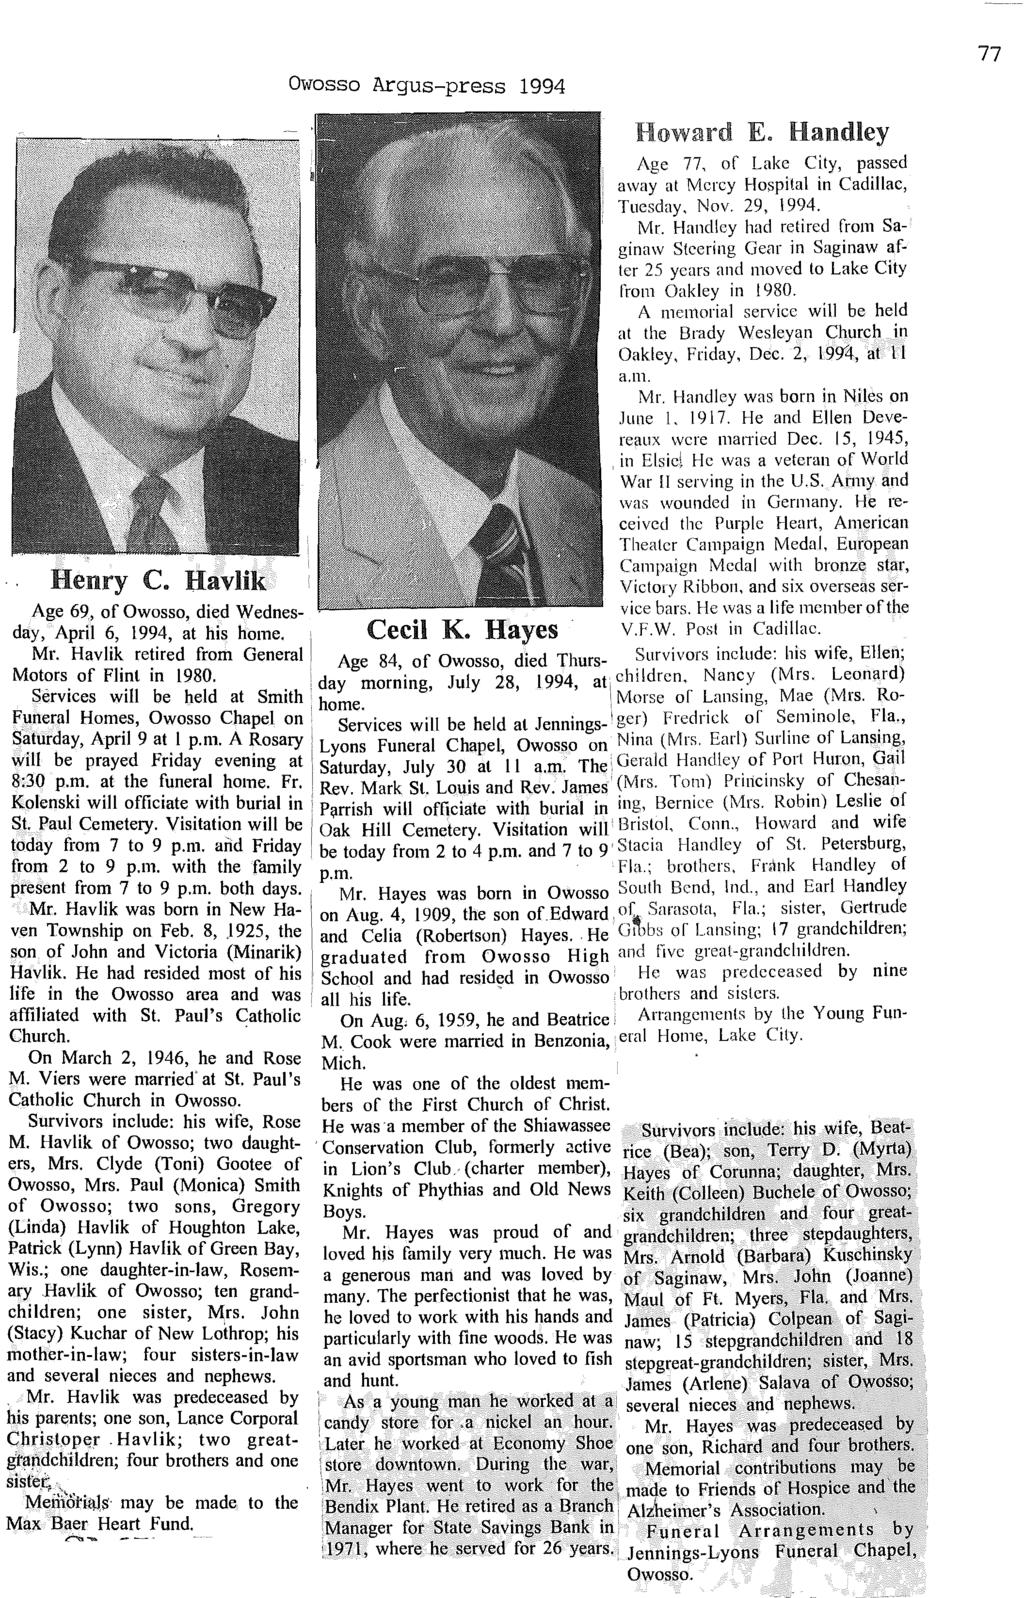 Owosso Argus-press 1994 E. Handley Age 77, of Lake City, passed away at Mercy Hospital in Cadillac, TtlCsday, Nov. 29, 1994. Mr.